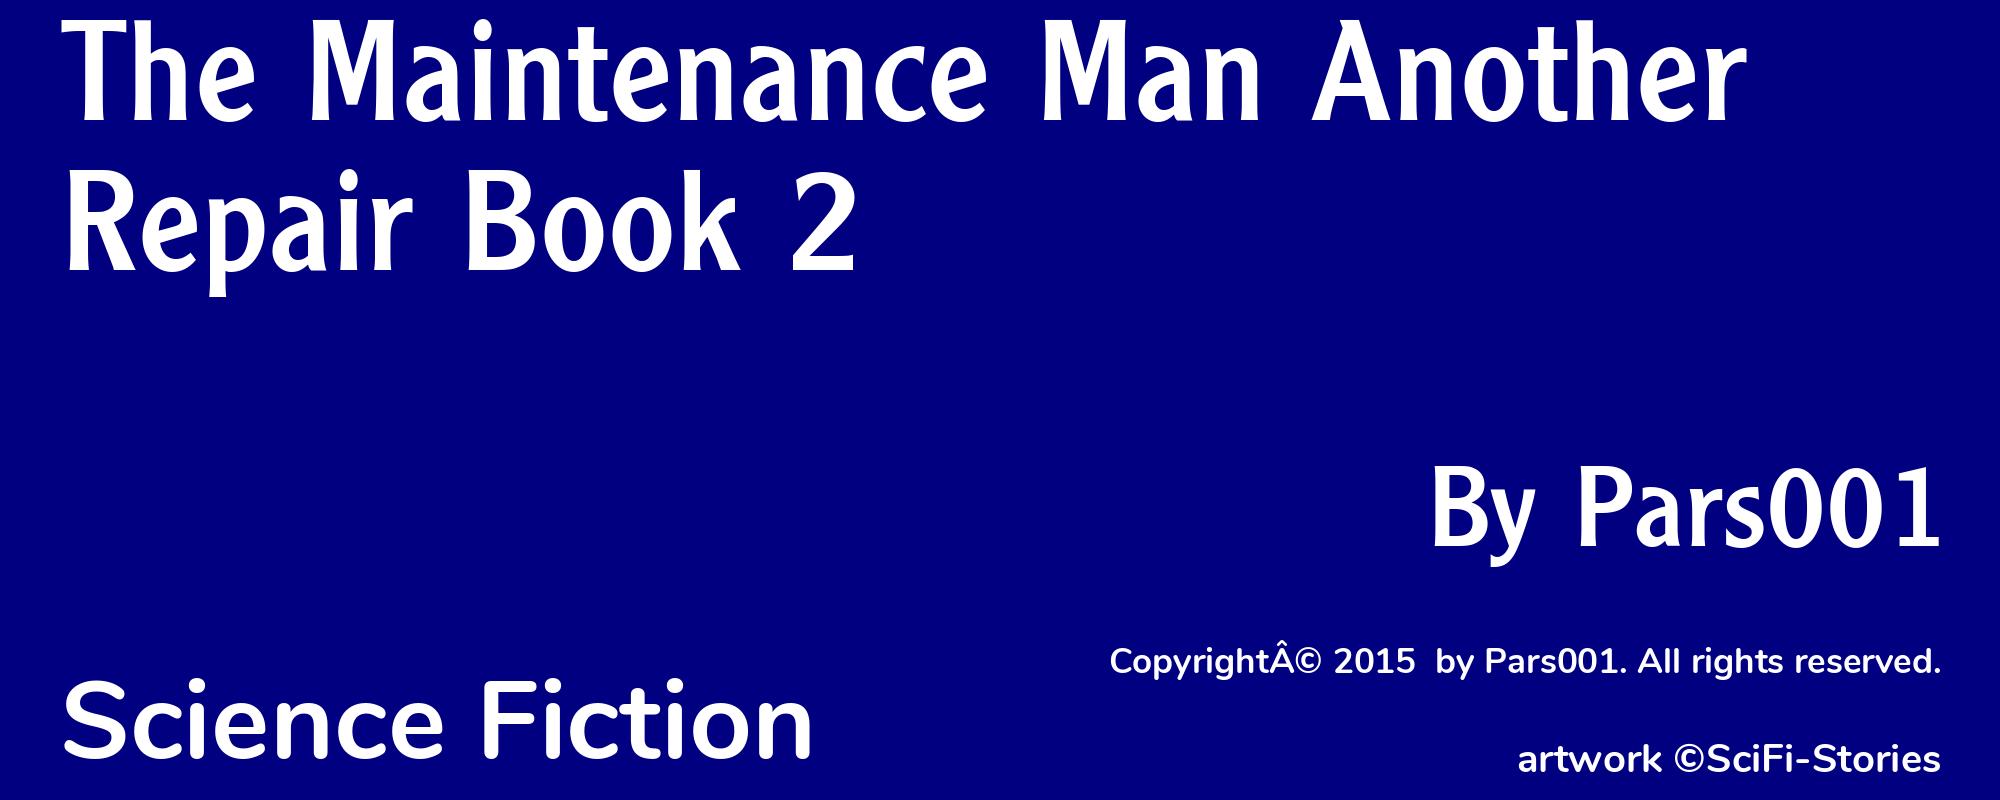 The Maintenance Man Another Repair Book 2 - Cover